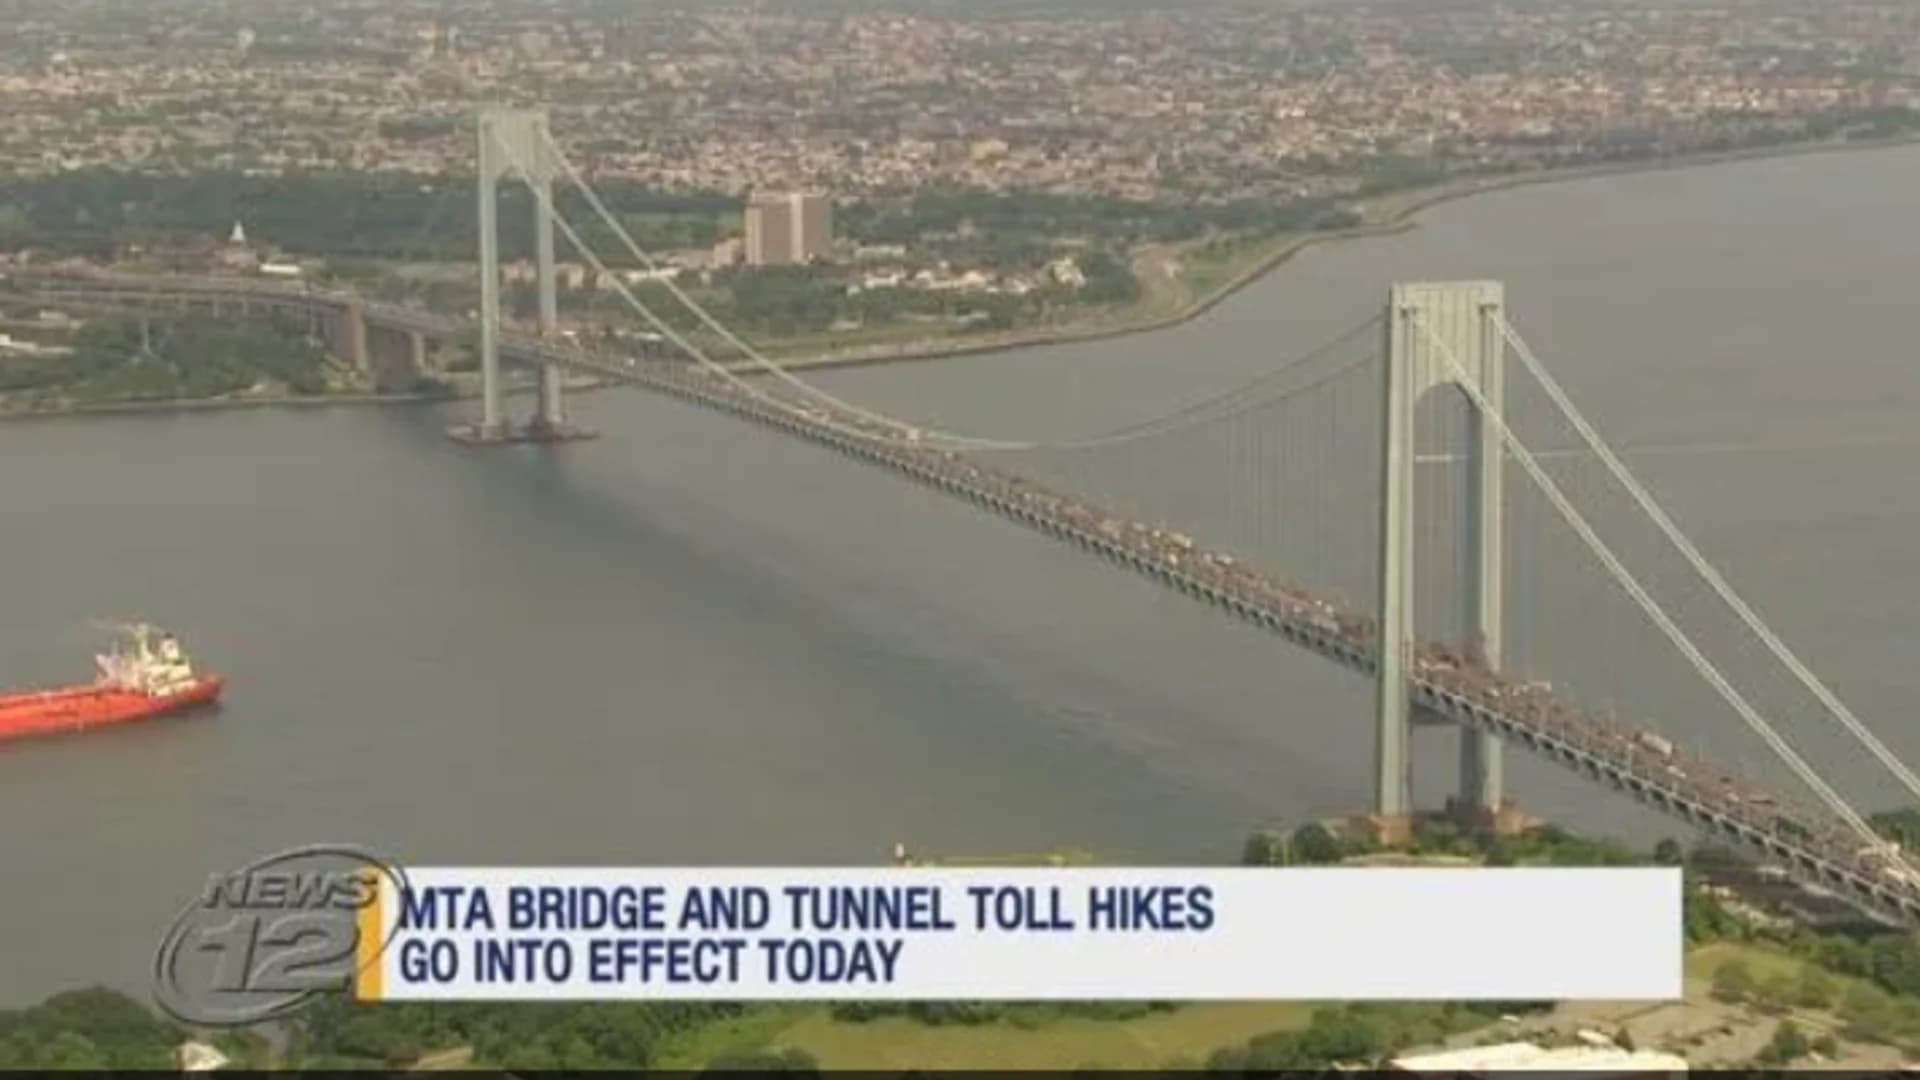 Toll hike for MTA bridges, tunnels goes into effect